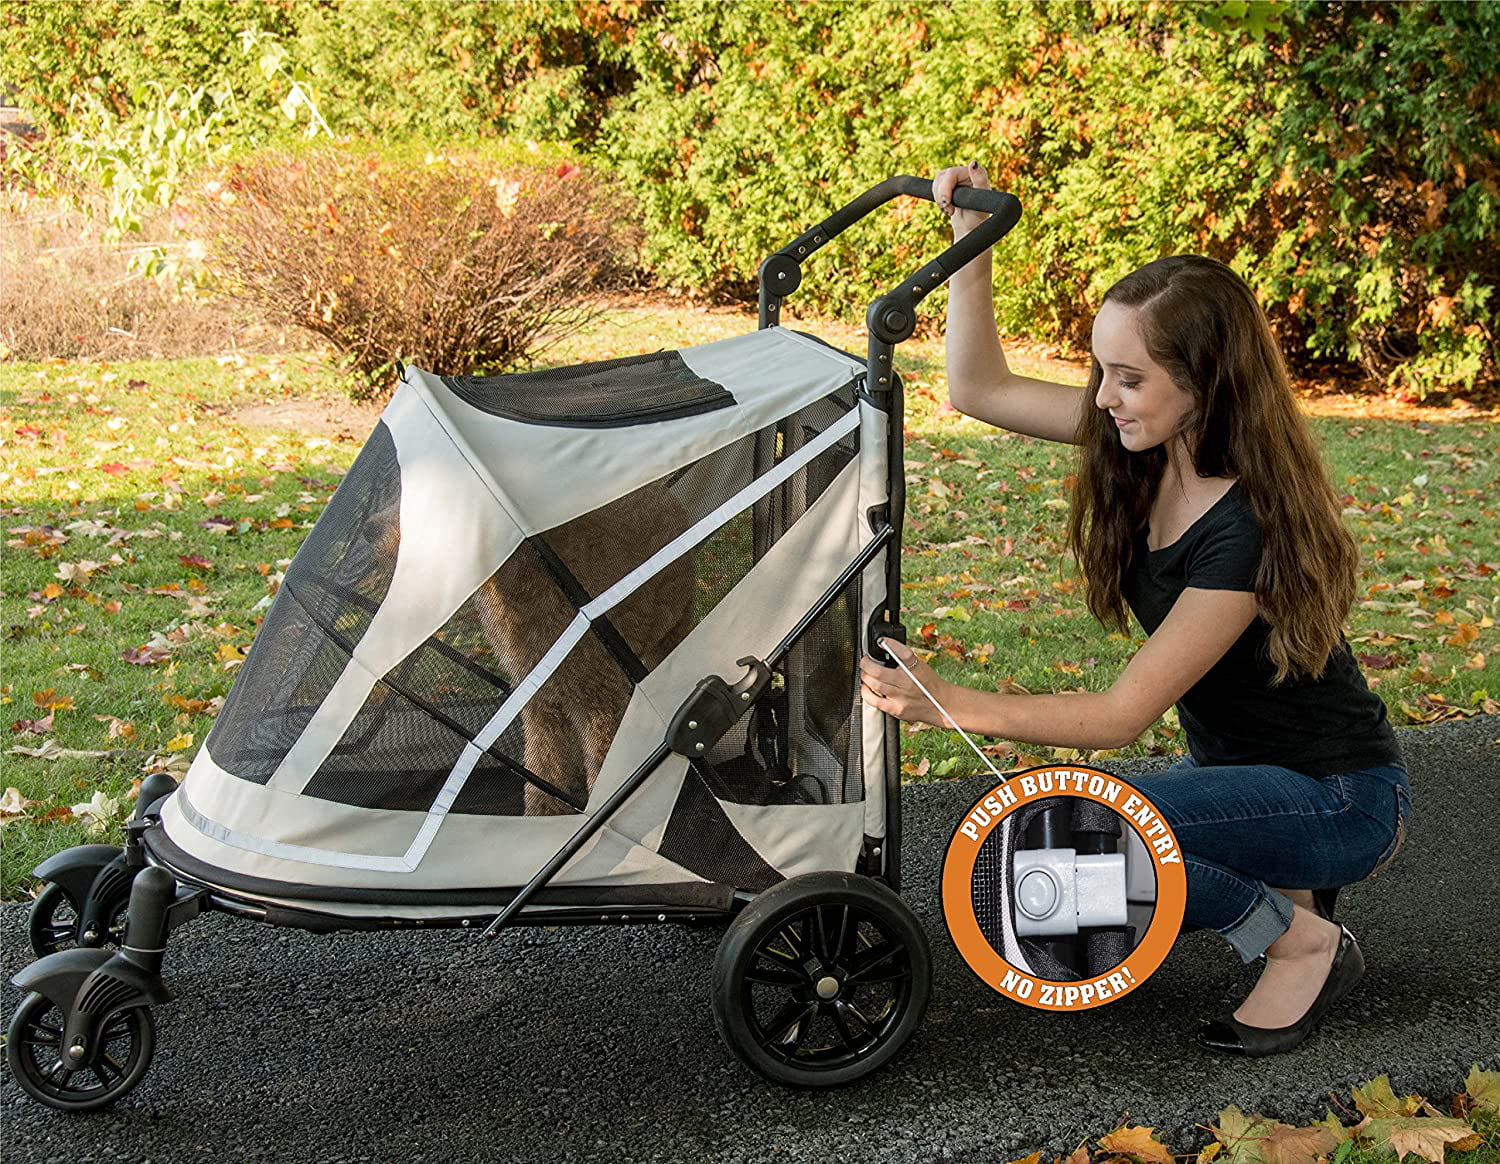 Pet Can Easily Walk in/Out Pet Gear NO-Zip Stroller Push Button Zipperless Dual Entry for Single or Multiple Dogs/Cats No Need to Lift Pet 